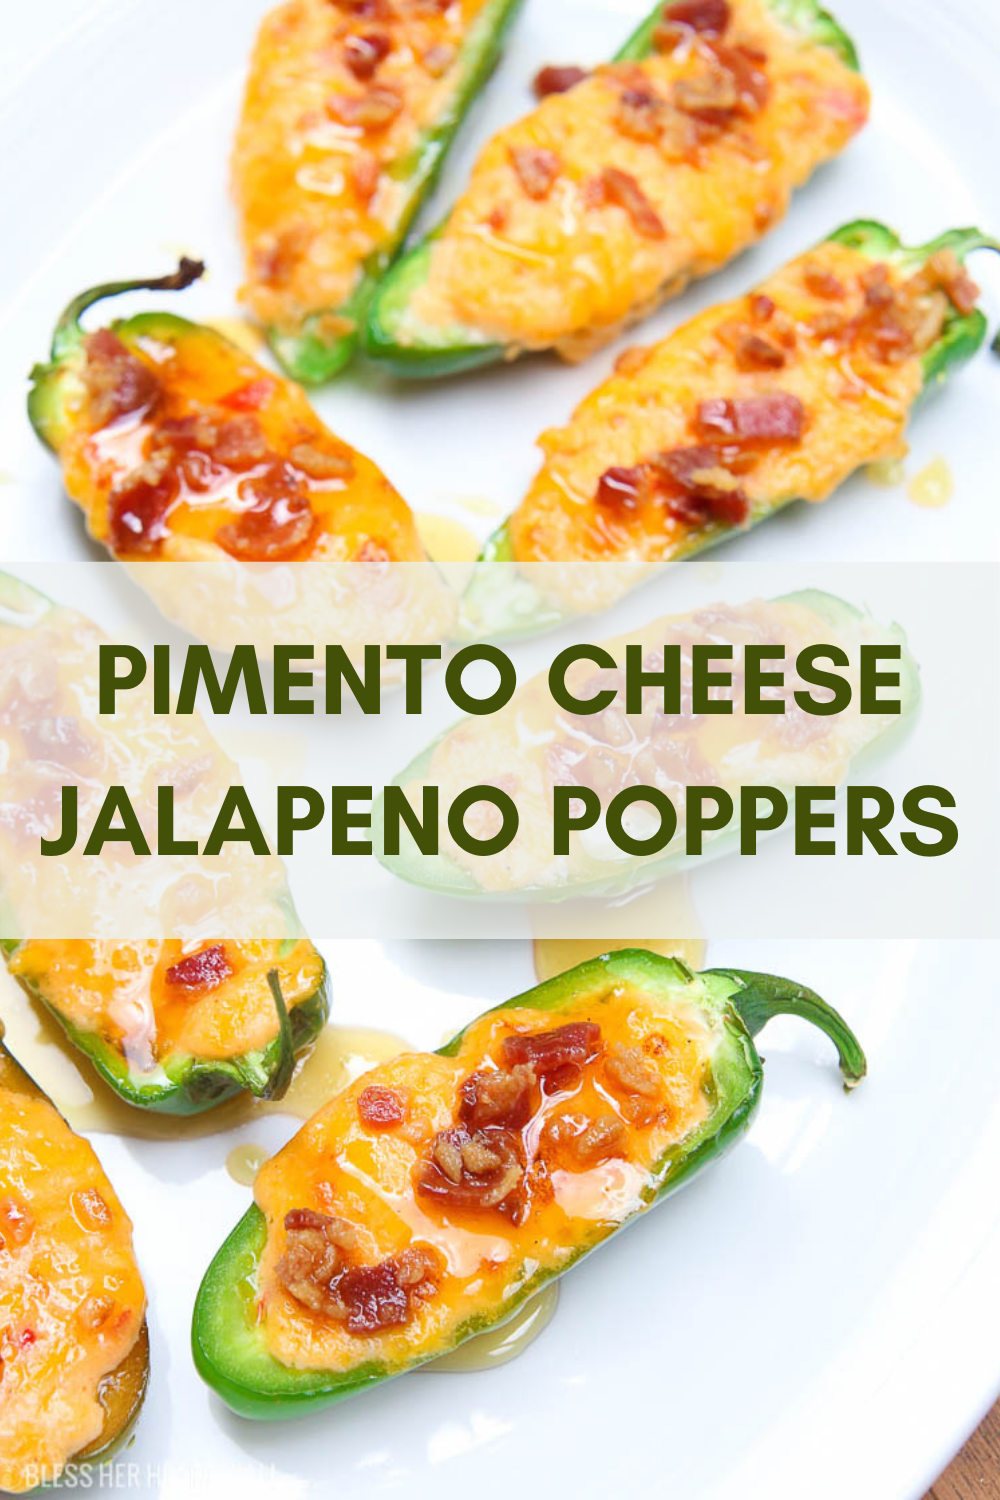 Pimento Cheese Jalapeno Poppers - Sweet & Spicy in just 5 Minutes!